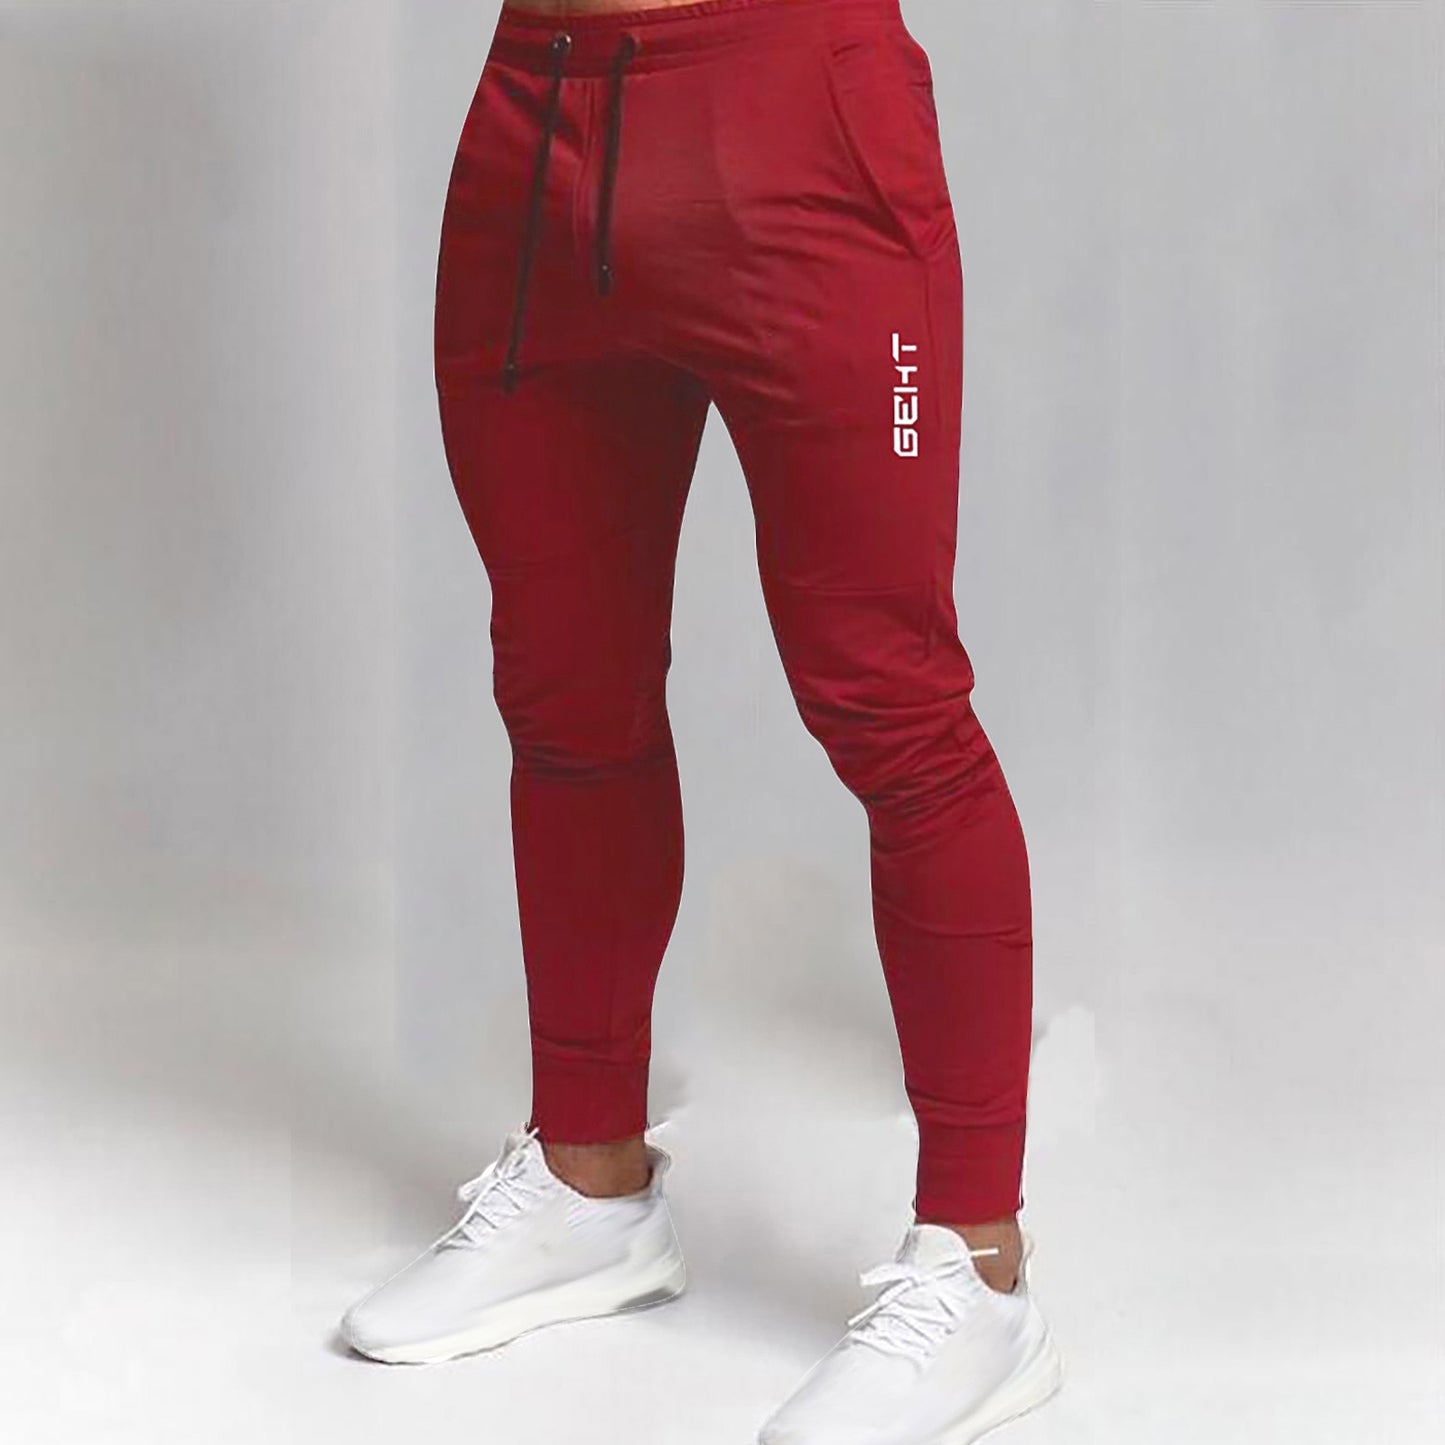 Men's Fitness and Leisure Skinny Trousers